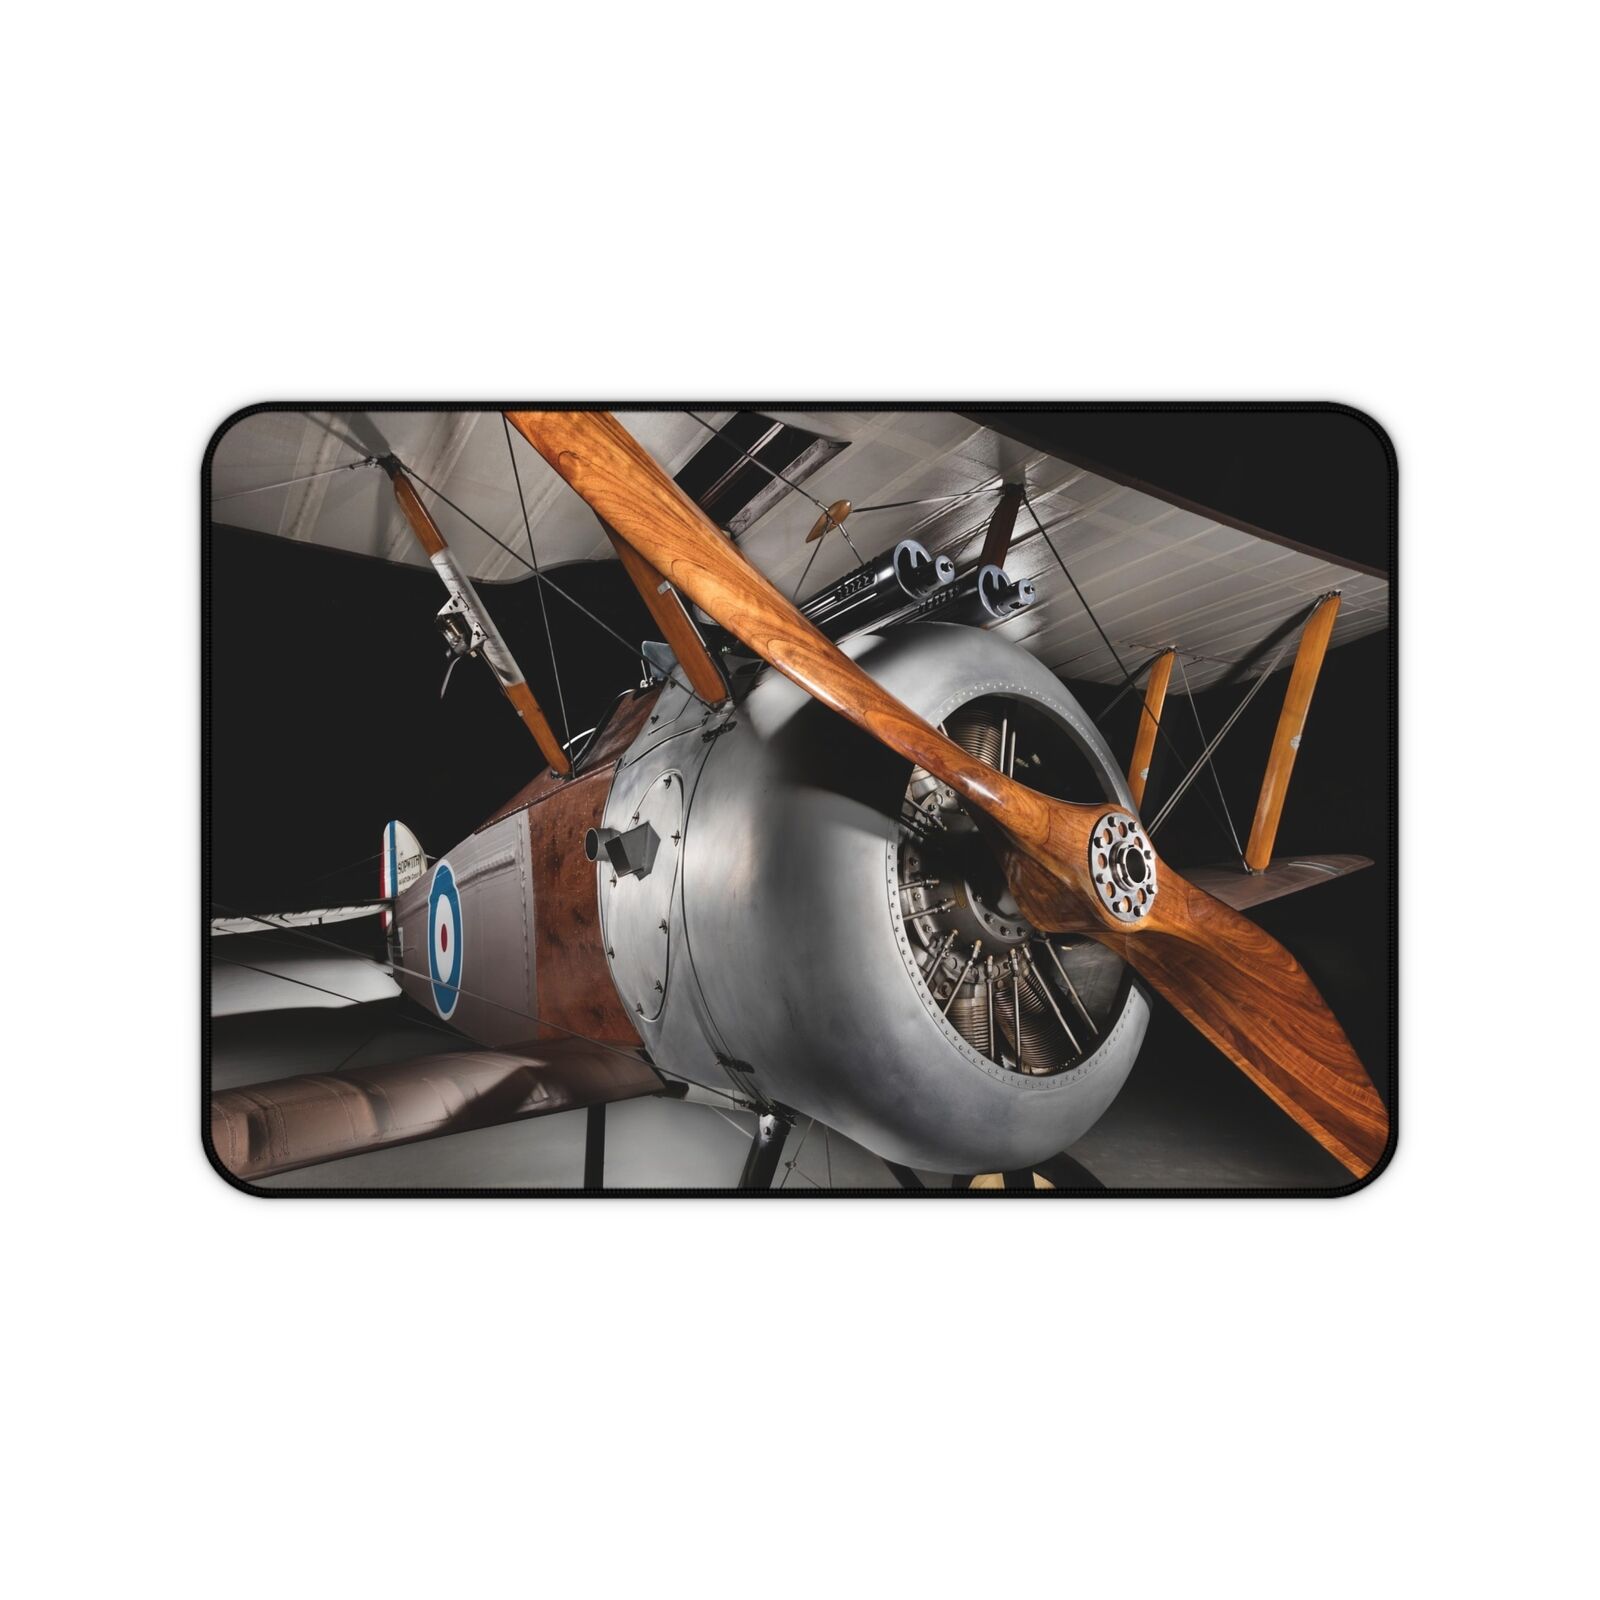 Sopwith Camel British WWI Aviation Airplane - 3 Sizes - Desk Mat Mouse Pad